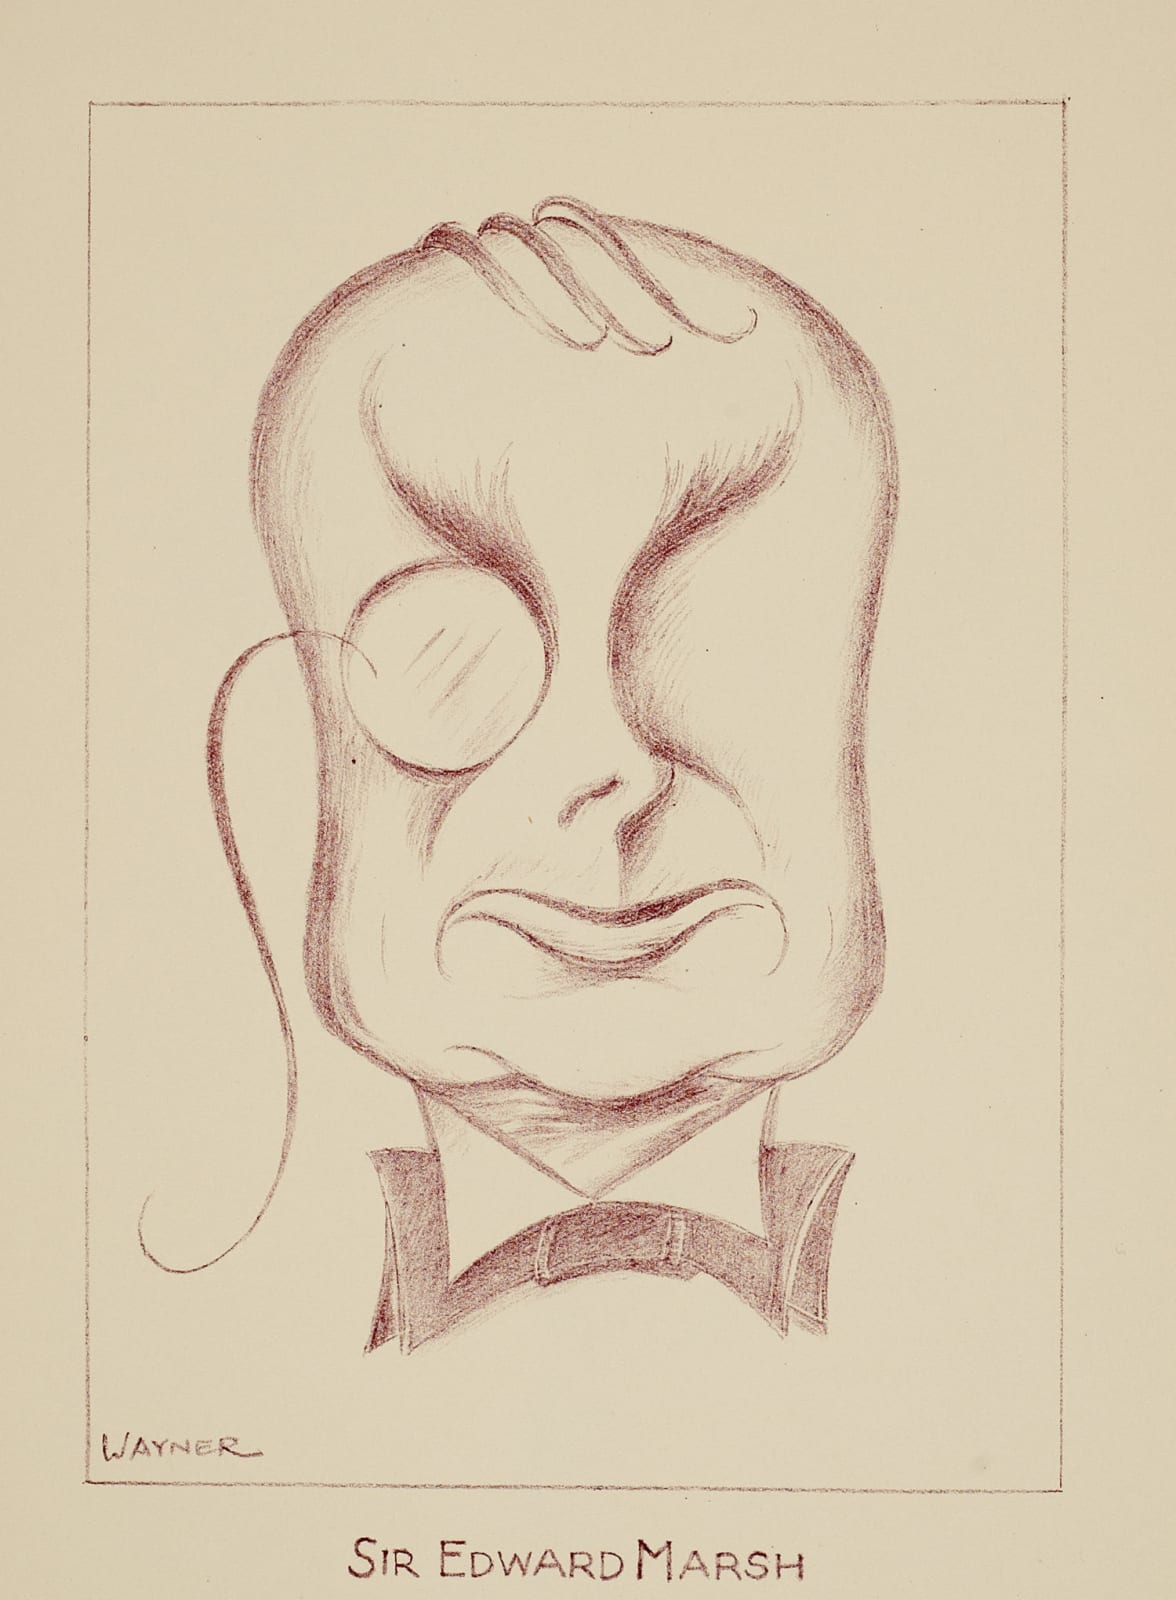 Mark Wayner (1888-1980) Sir Edward Marsh c.1940 Stone lithograph on paper 35.5 x 24 cm Ben Uri Collection © Mark Wayner estate To see and discover more about this artist click here